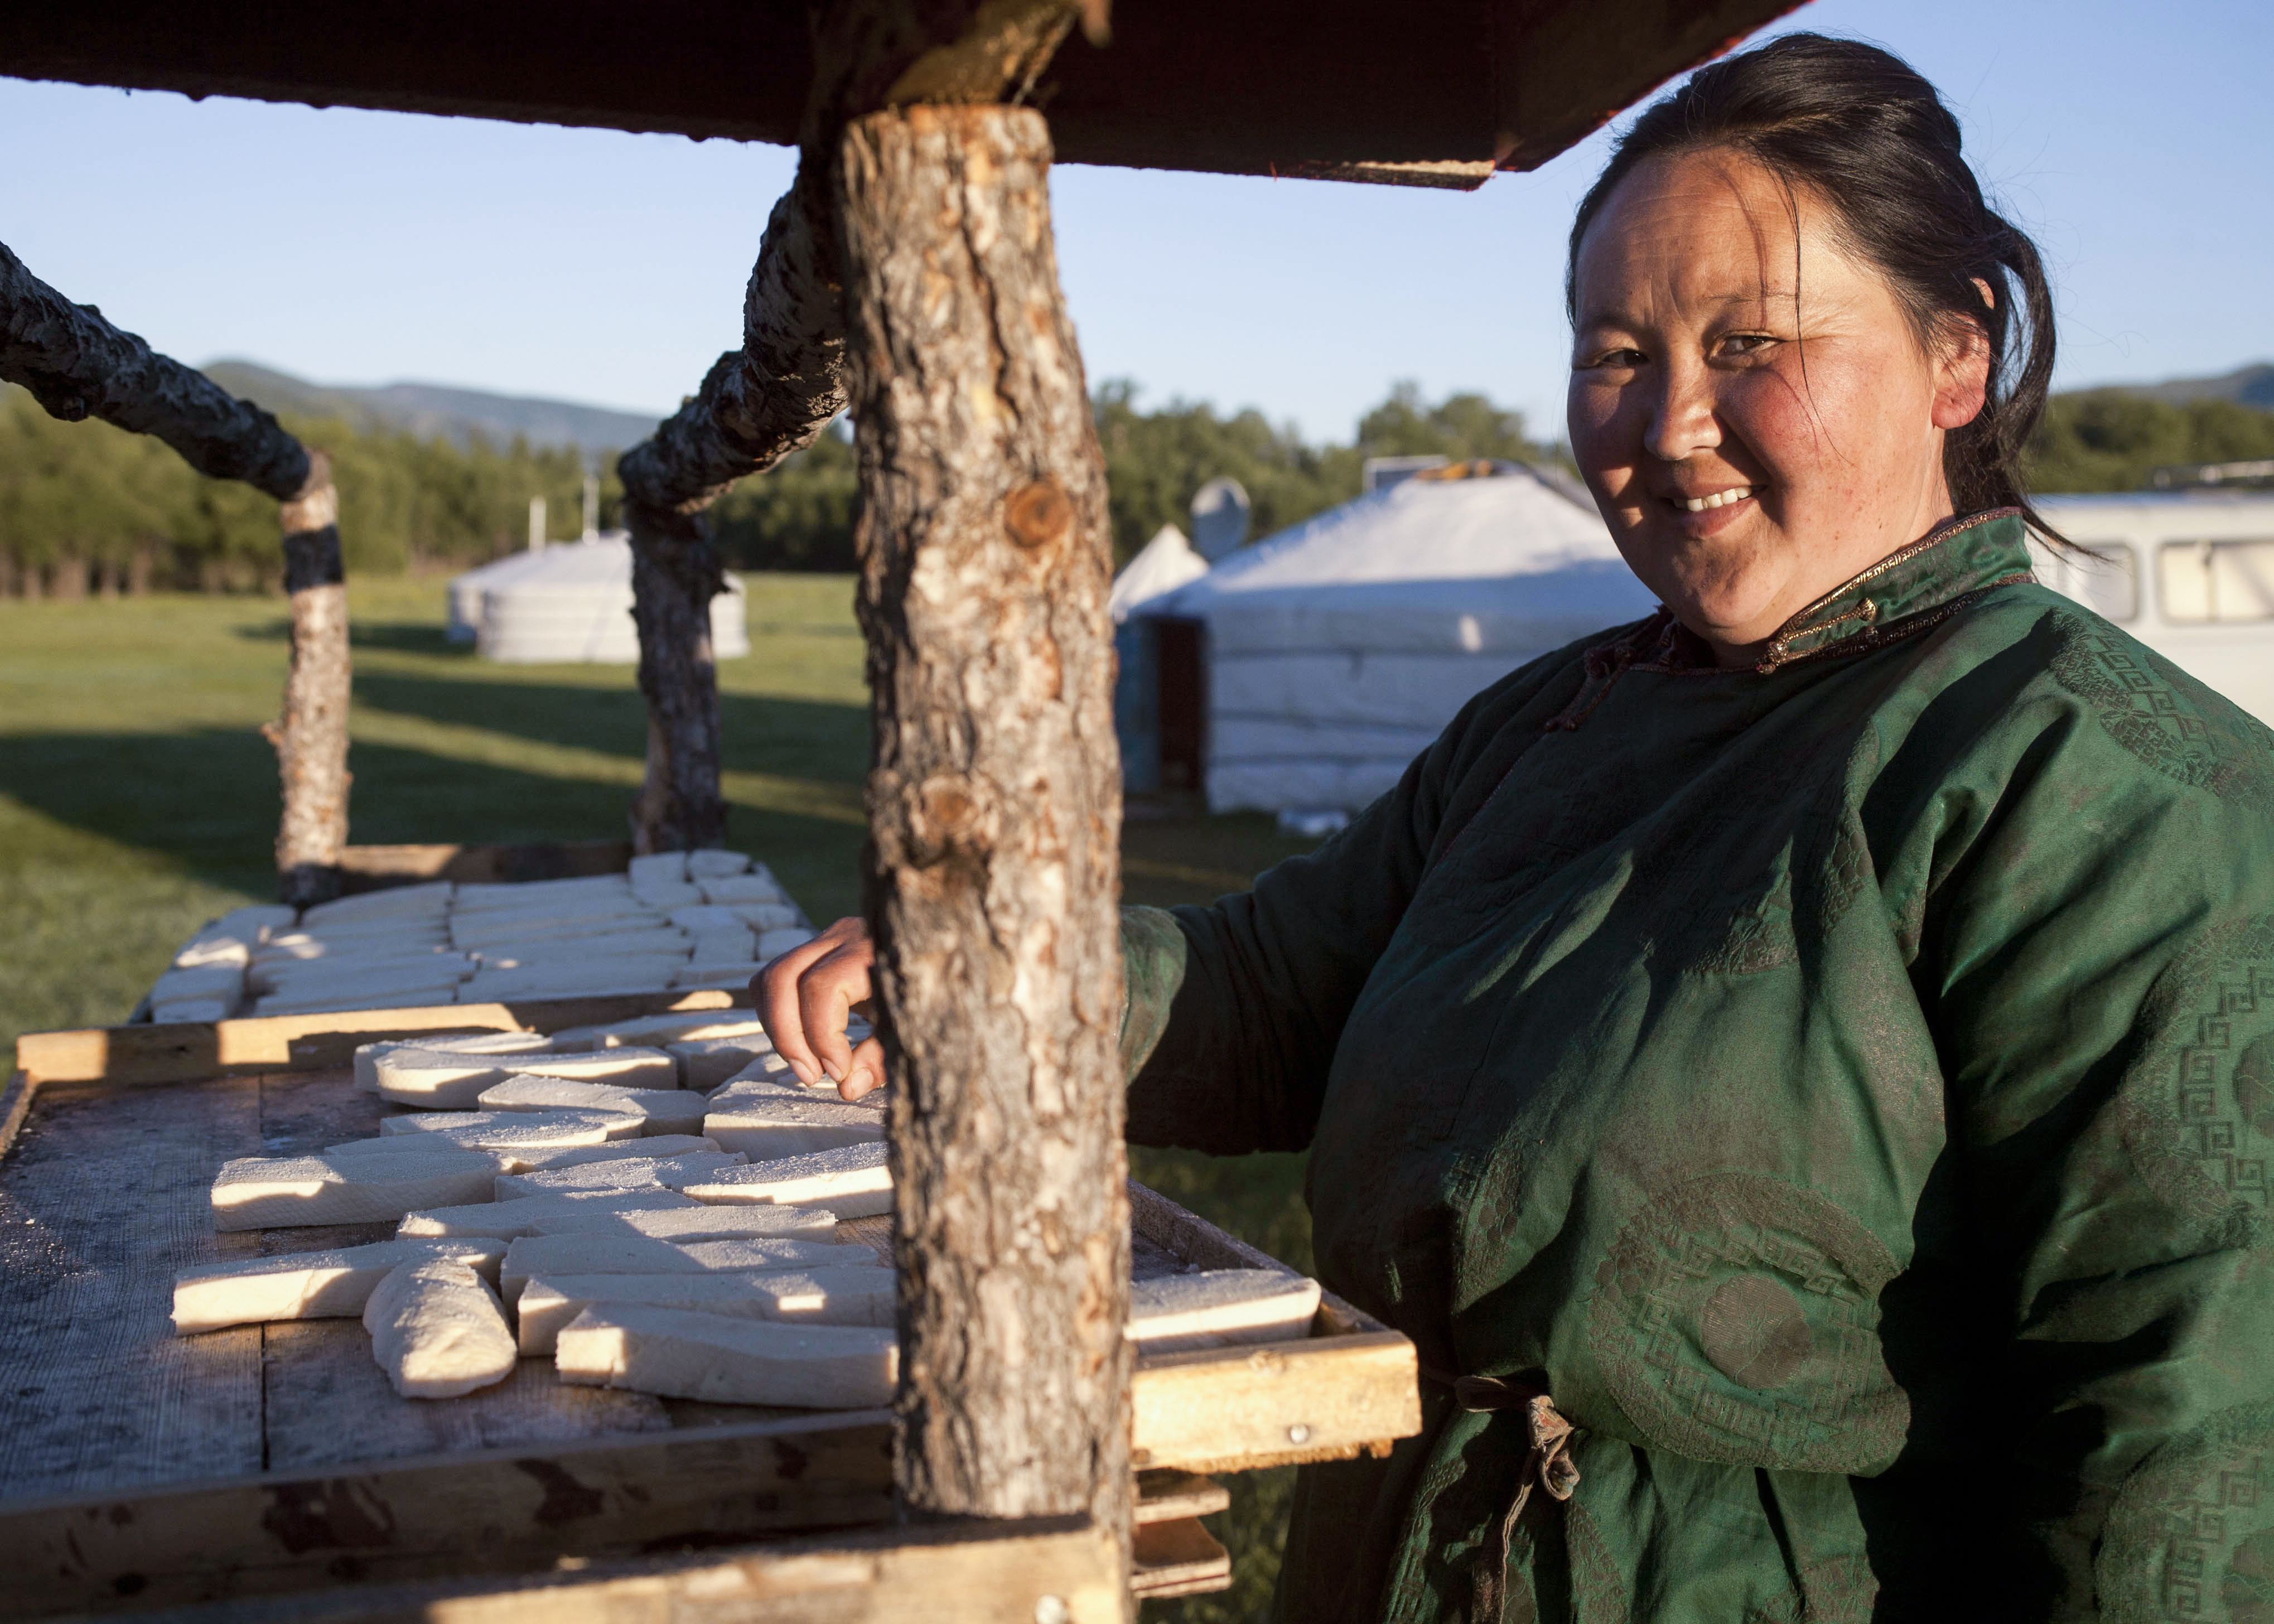 A homestay provides a way to get real insights into the Mongolian way of life